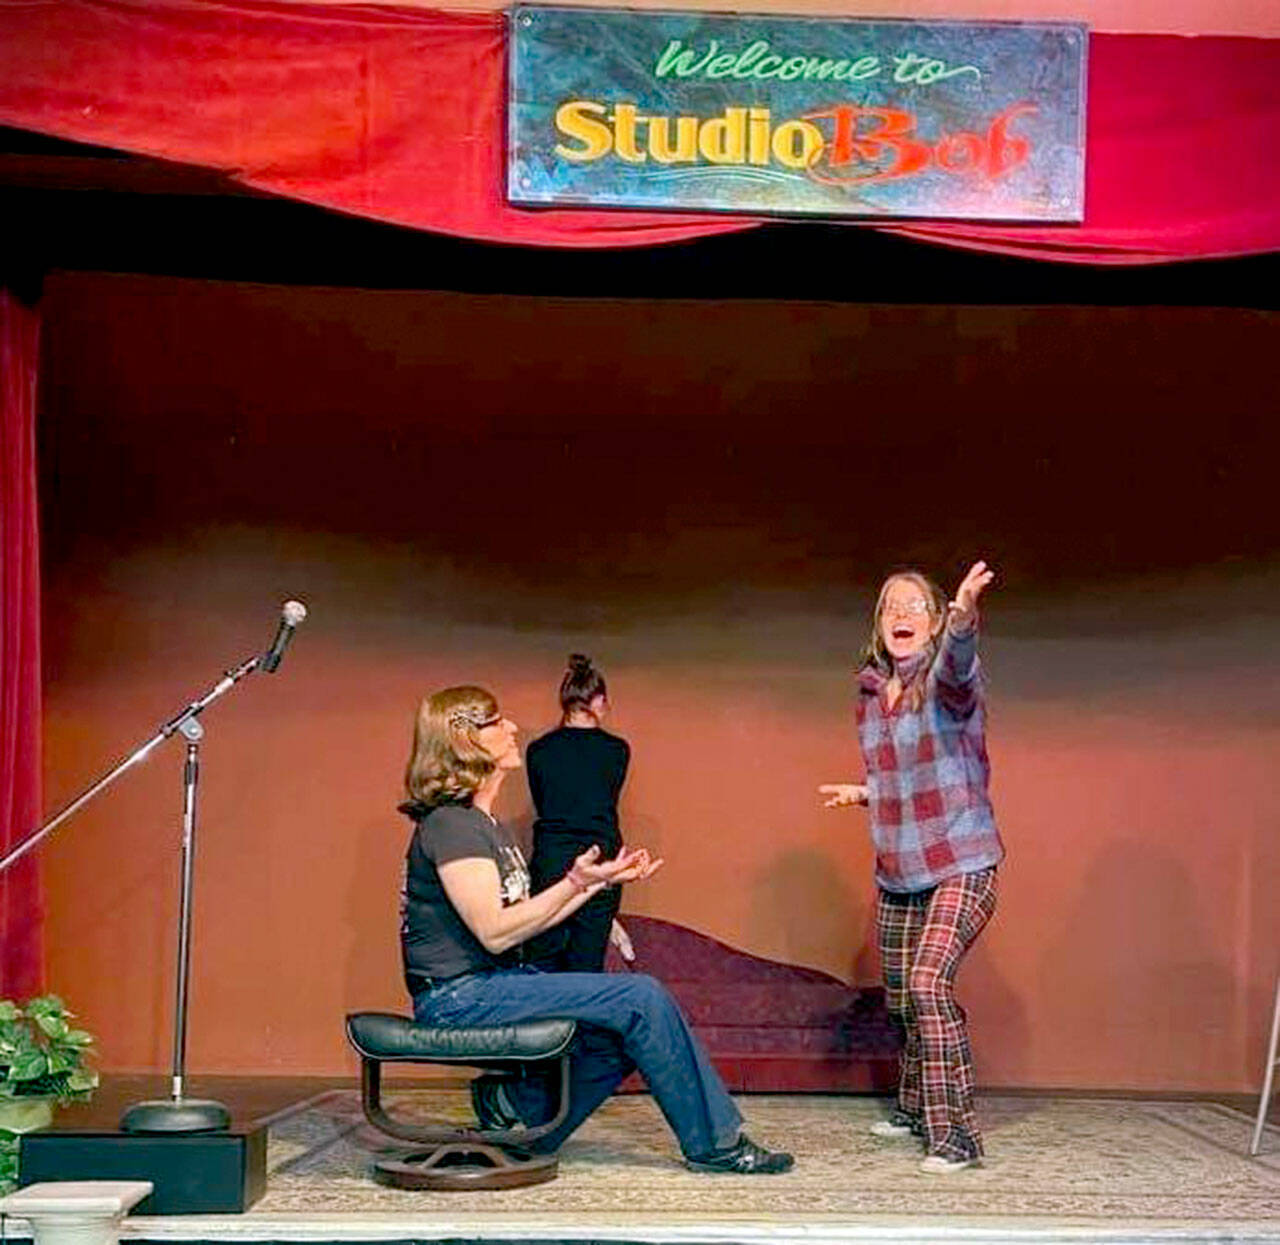 IWANT (Improv Without A Net Troupe) members, from left, Cat White, Kailey Droz and Lara Starcevich rehearse an improv game called Sit, Stand or Wall.